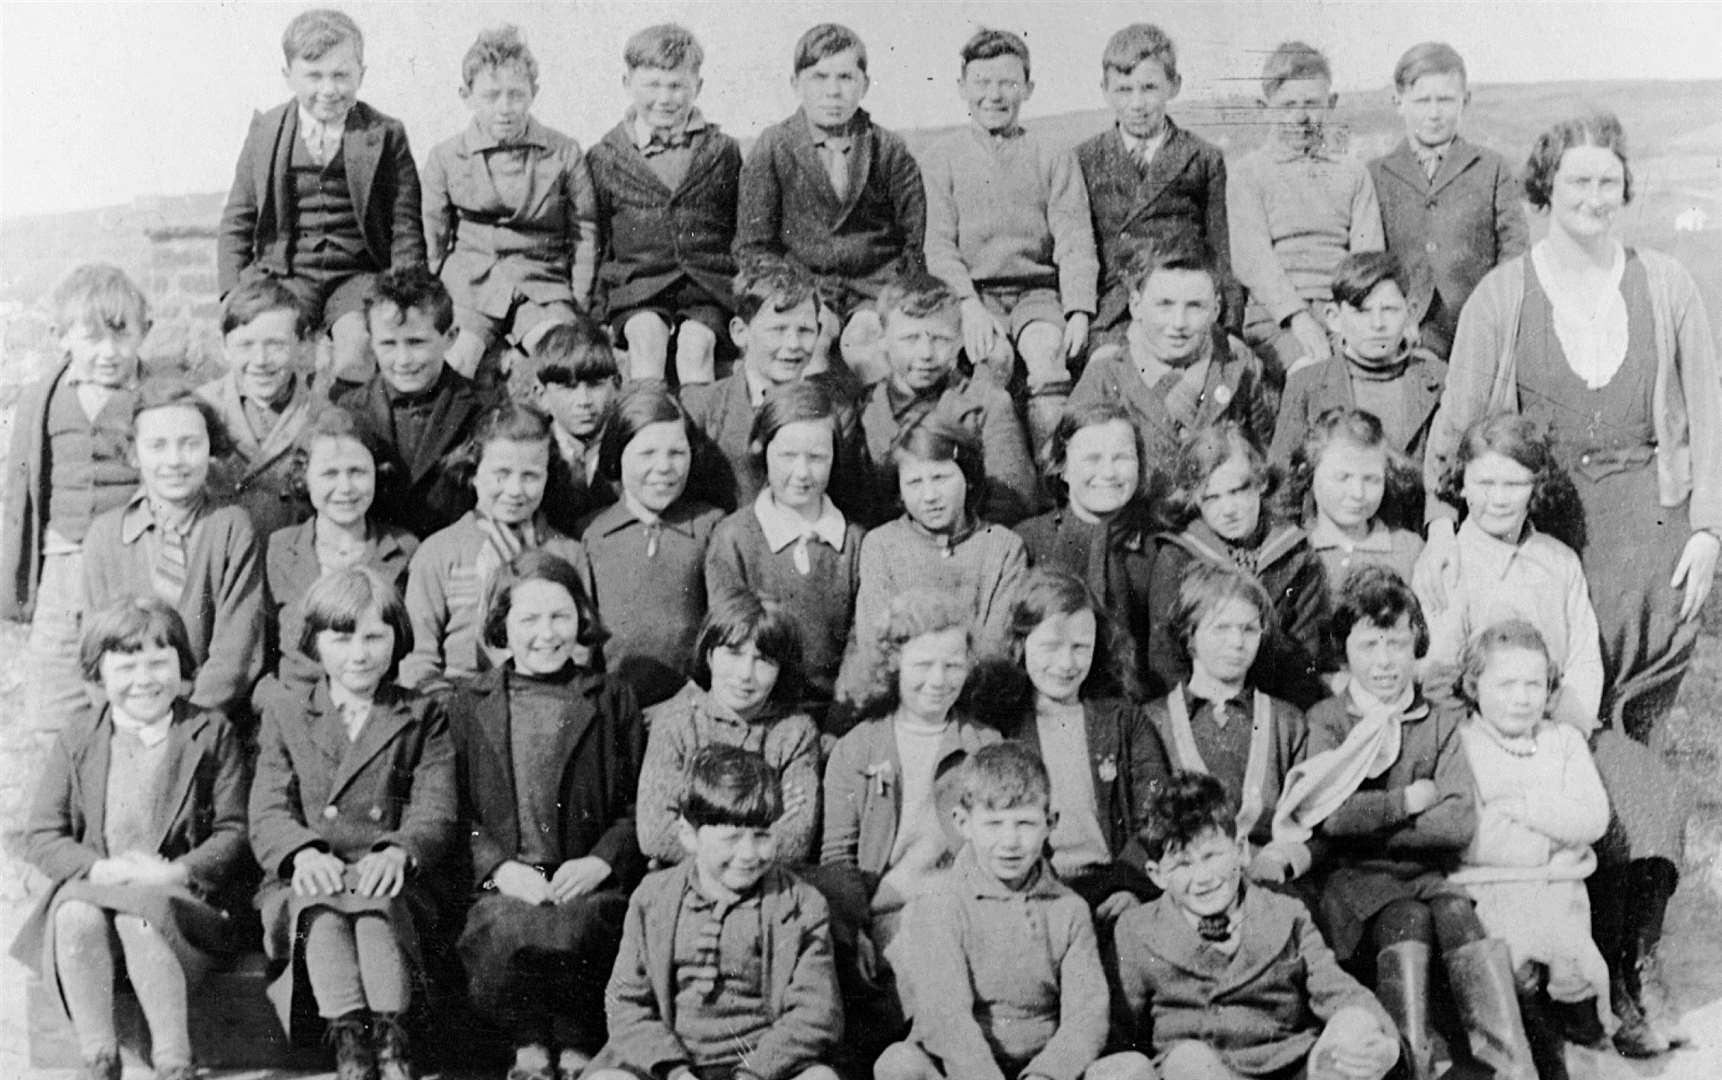 Dunbeath school pupils from about 90 years ago. The picture is believed to have been taken by a visiting school photographer in the late 1920s or early ’30s.